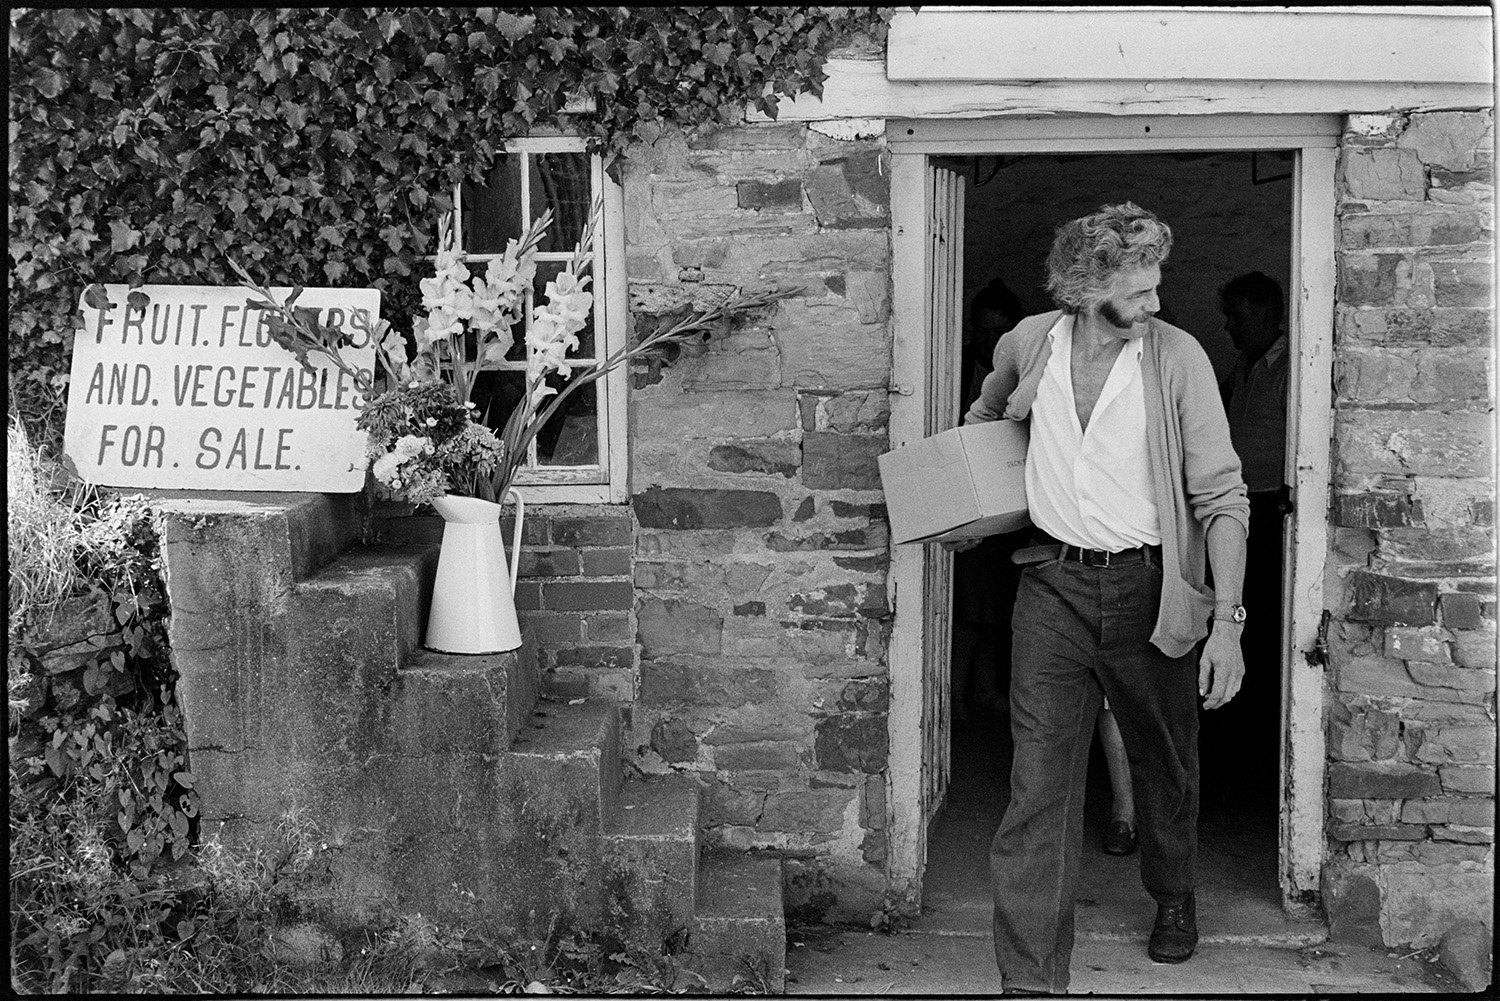 Front of fruit store, putting out flowers. 
[A man bringing a box of fruit or vegetables out of a house to sell on his fruit and vegetable stall in Dolton. A jug with flowers and a sign reading 'Fruit, Flowers and Vegetables For Sale' is placed on steps outside the cottage.]